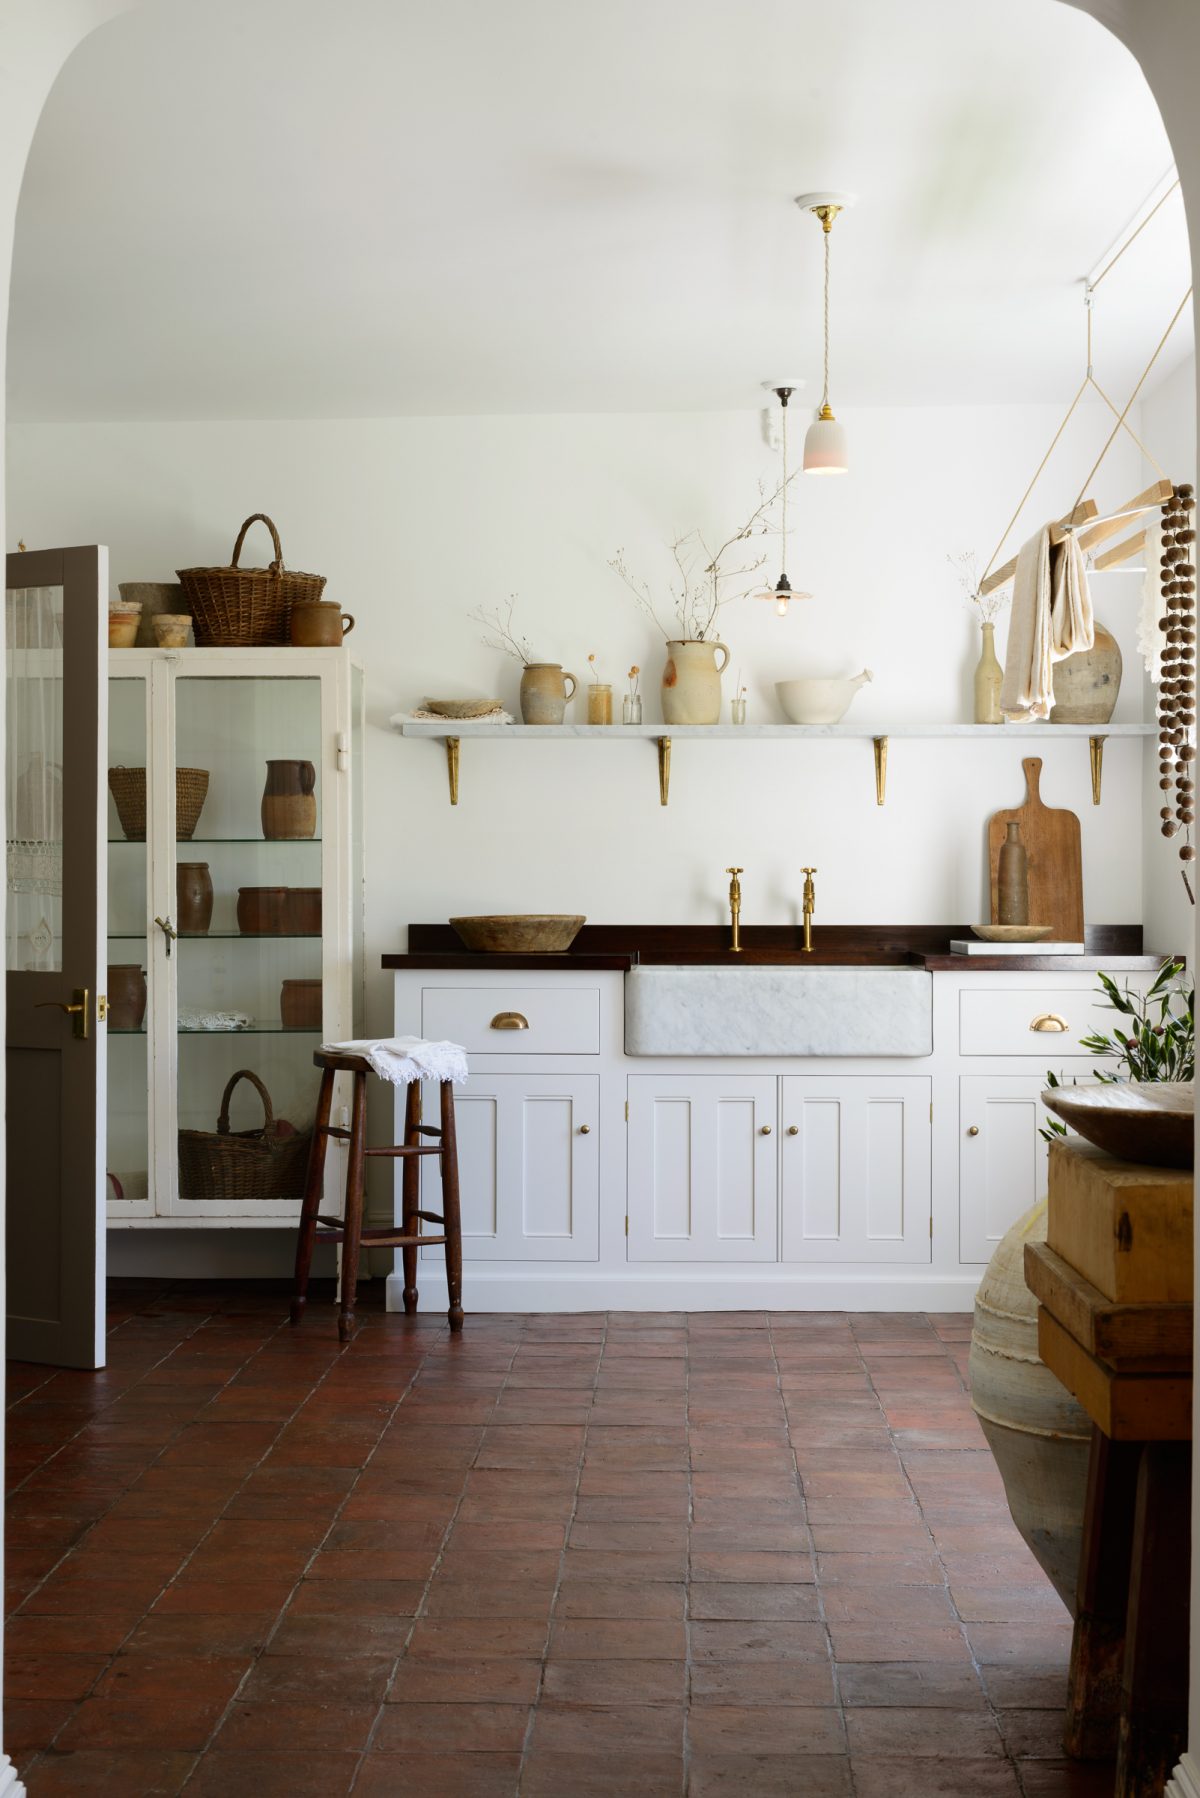 Utility room inspired by old-style Italian kitchens.